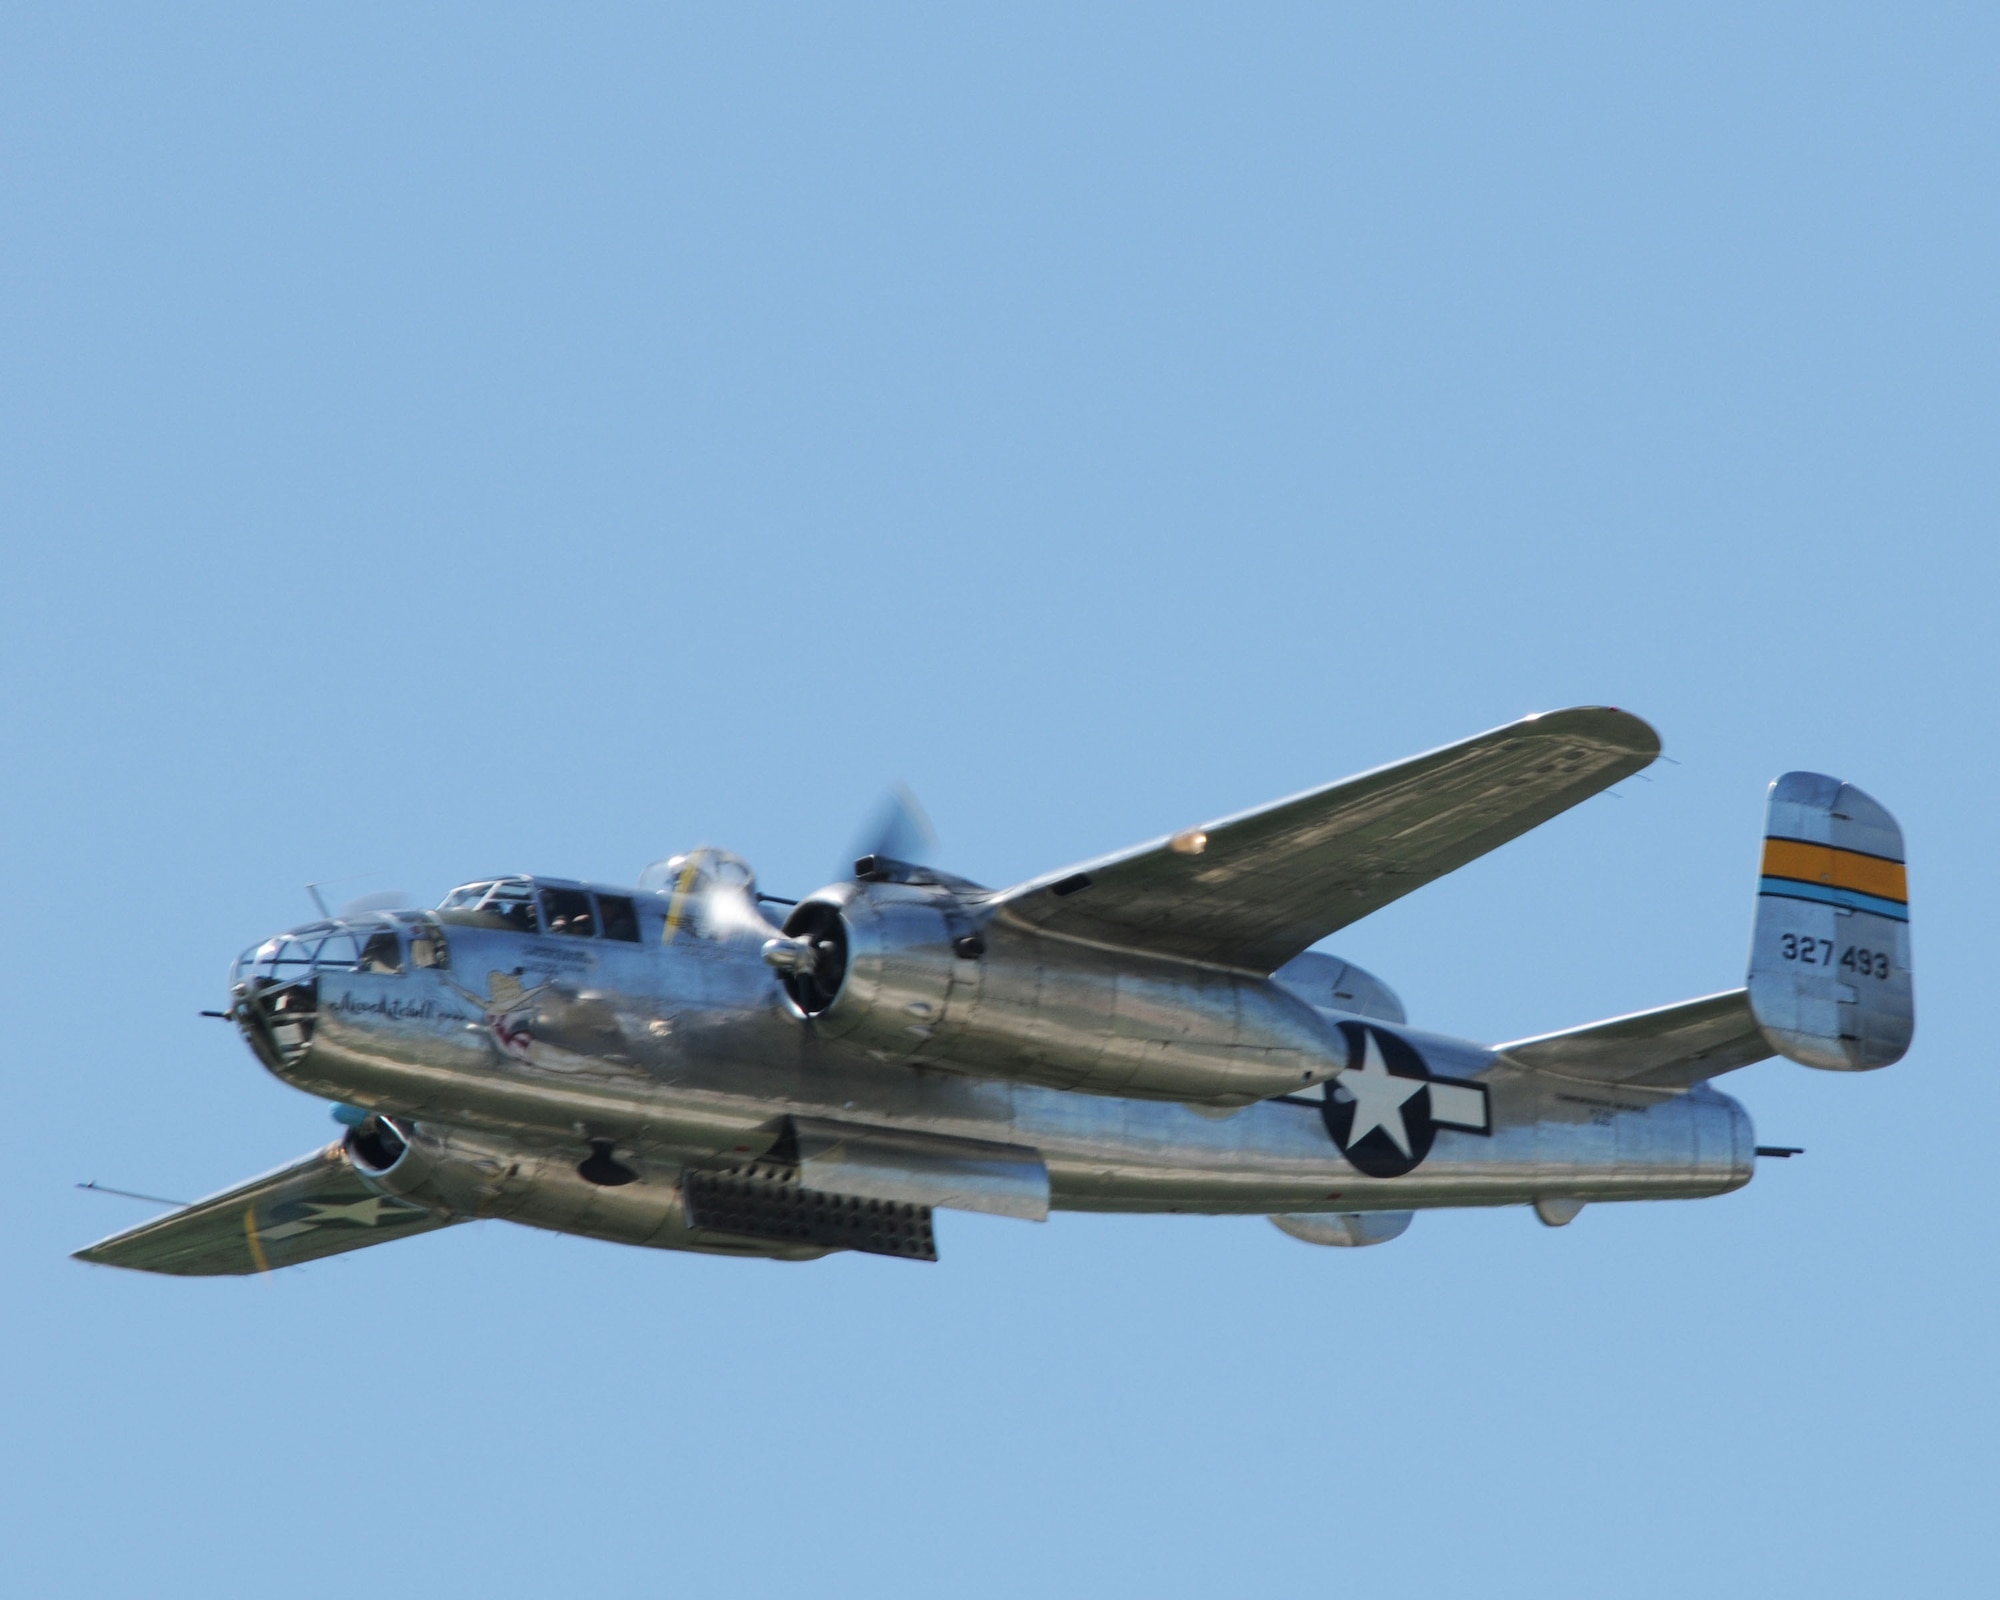 A B25J Mitchell, a World War II bomber, Flies high over the crowds at the Sioux Gateway Airport / Col. Bud Day Field, in Sioux City, Iowa.  This B-25, named "Miss Mitchell" flew 130 missions over North Africa & Italy, will be on display at the "Air and Ag Show" hosted by the 185th Air Refueling Wing.  Official Air Force Photo by: MSgt. Bill Wiseman (released)